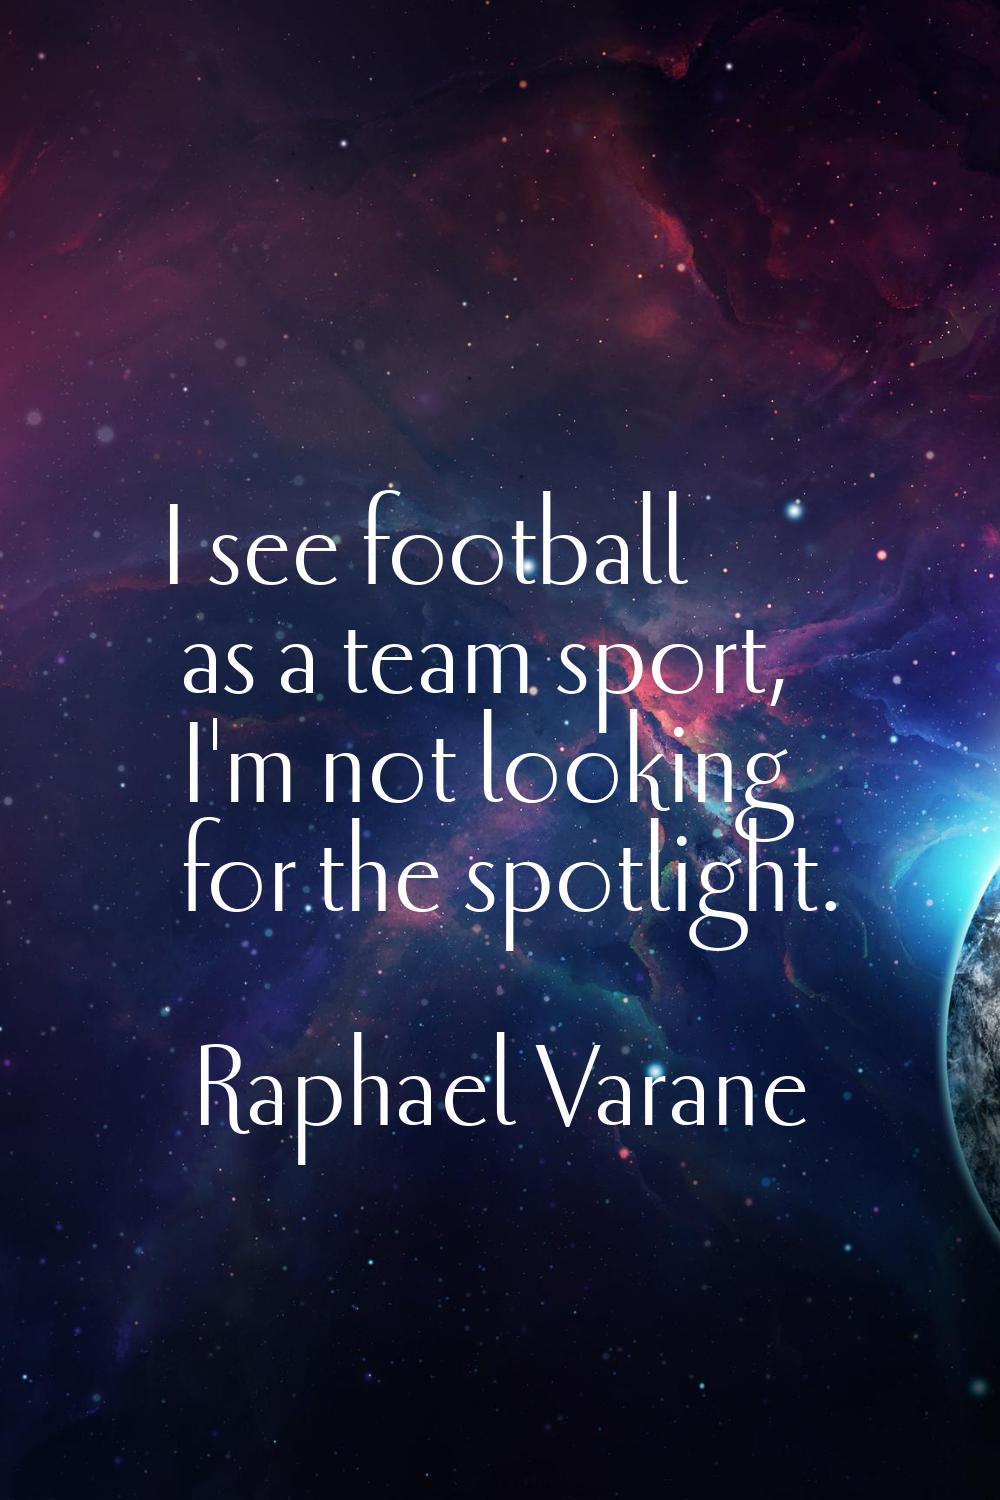 I see football as a team sport, I'm not looking for the spotlight.